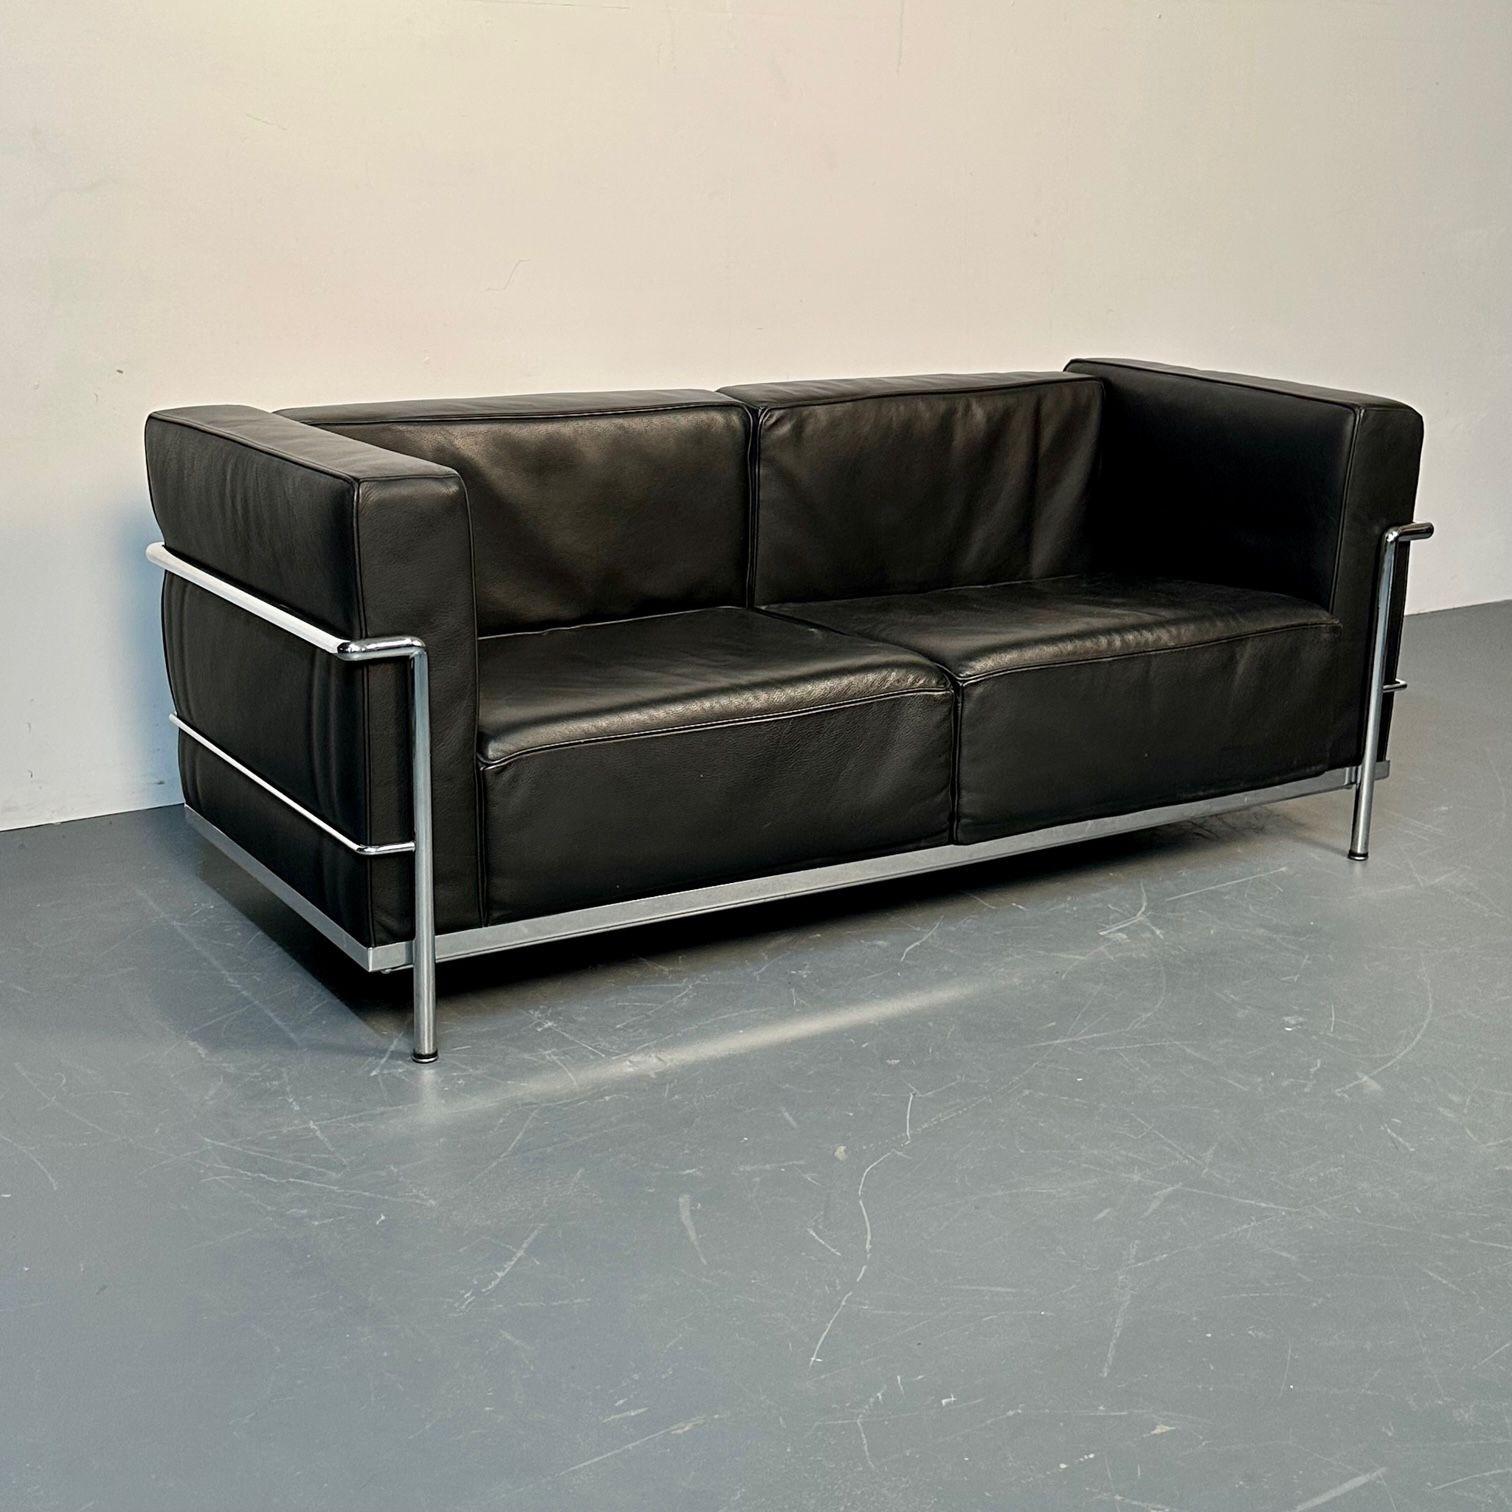 Late 20th Century Mid-Century Modern LC2 Sofa by Le Corbusier, Black Leather, Two Seater, Perriand